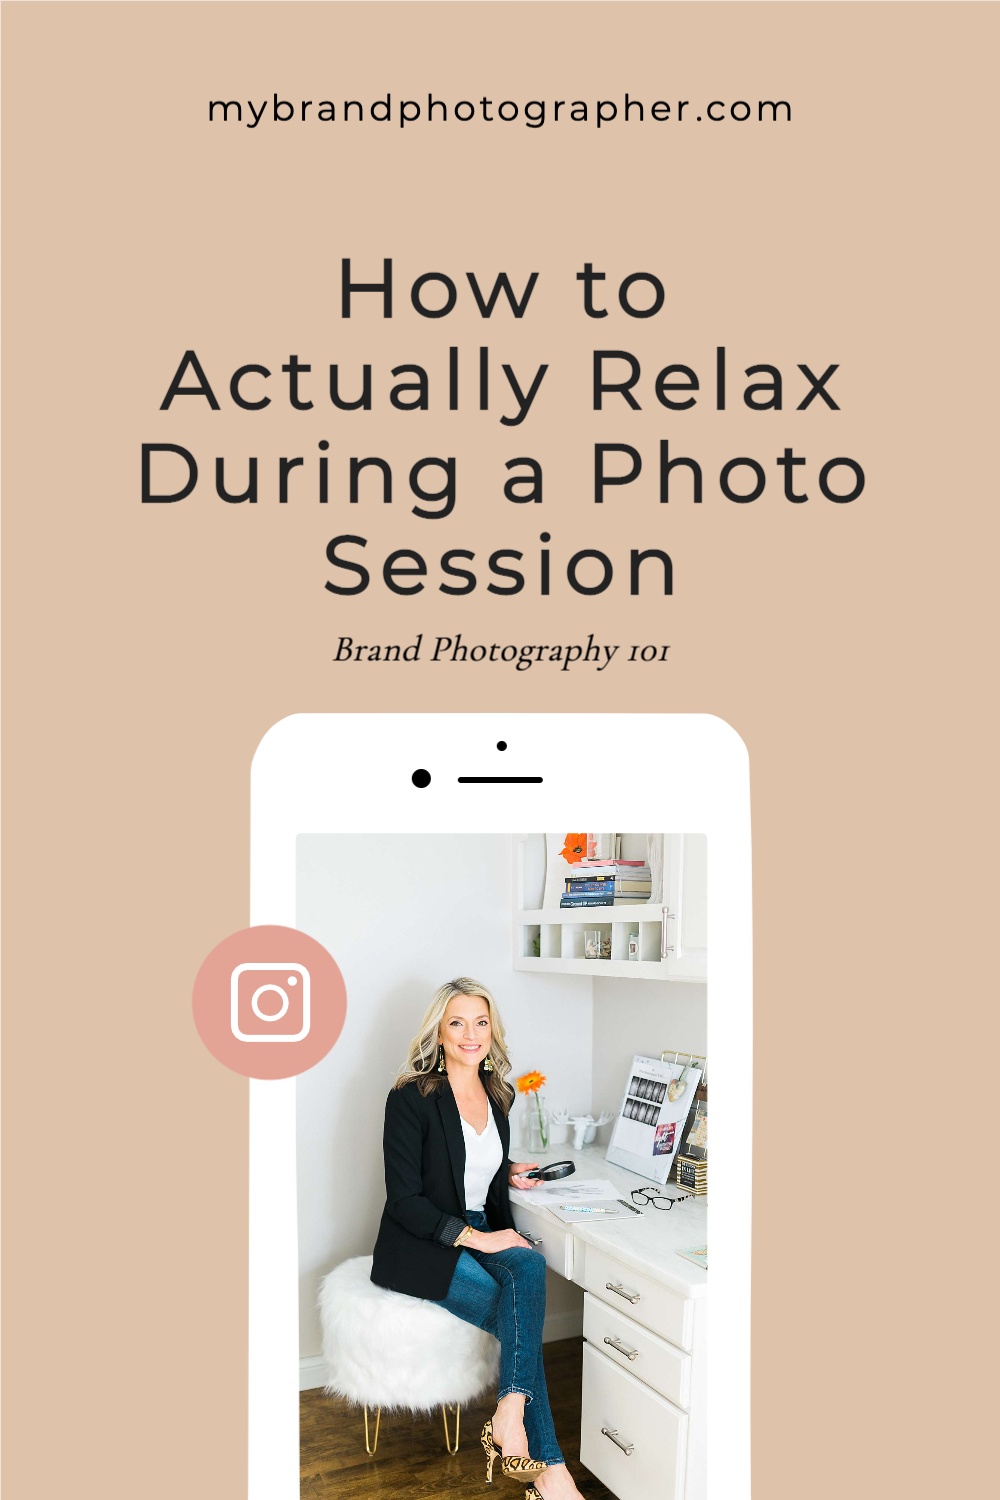 How to Actually Relax During Your Brand Photo Session